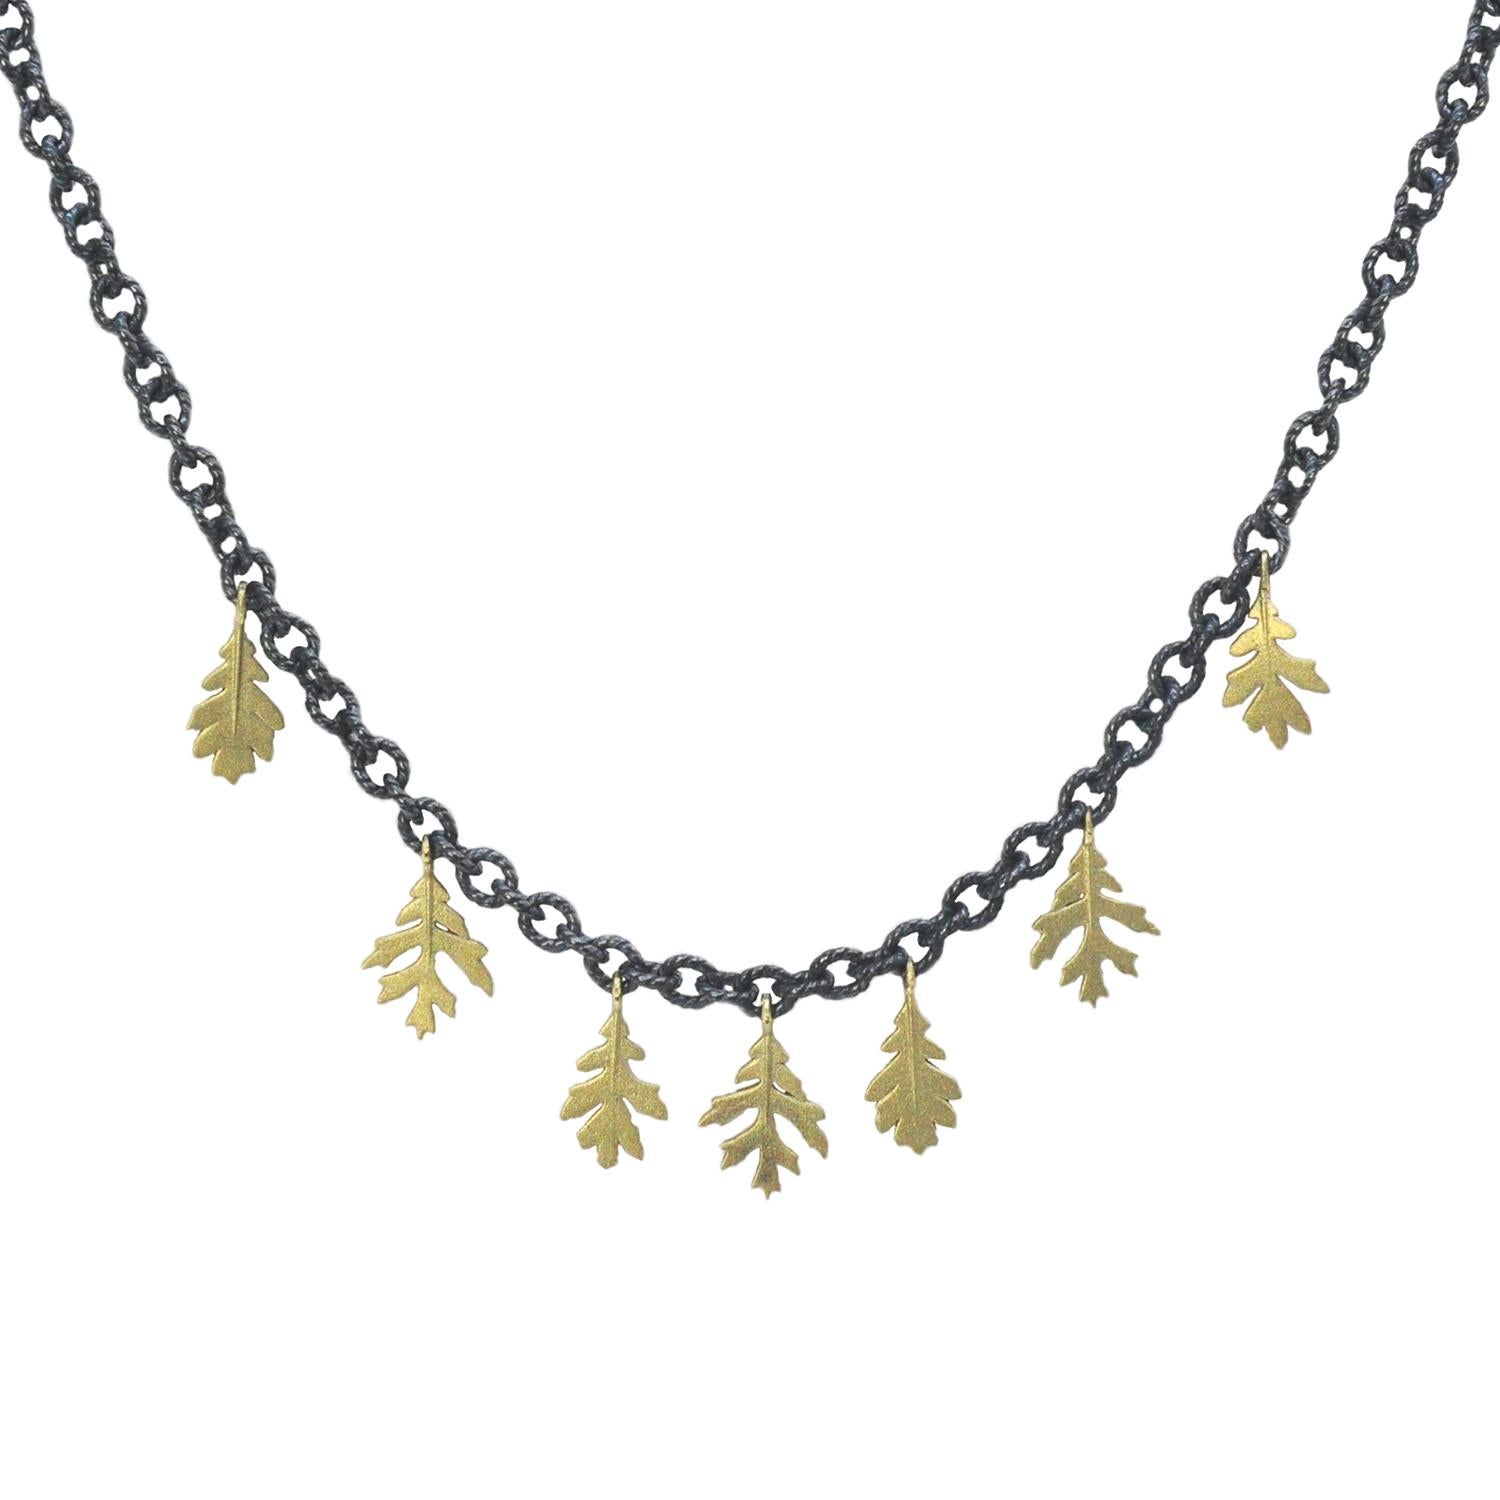 This beautifully earthy necklace brings the perfect balance of drama and delicacy, with contrasting metals and tiny gold leaves that dance along your neckline. A great piece for layering, or stunning simply on its own!

Seven oak leaves in 18k gold